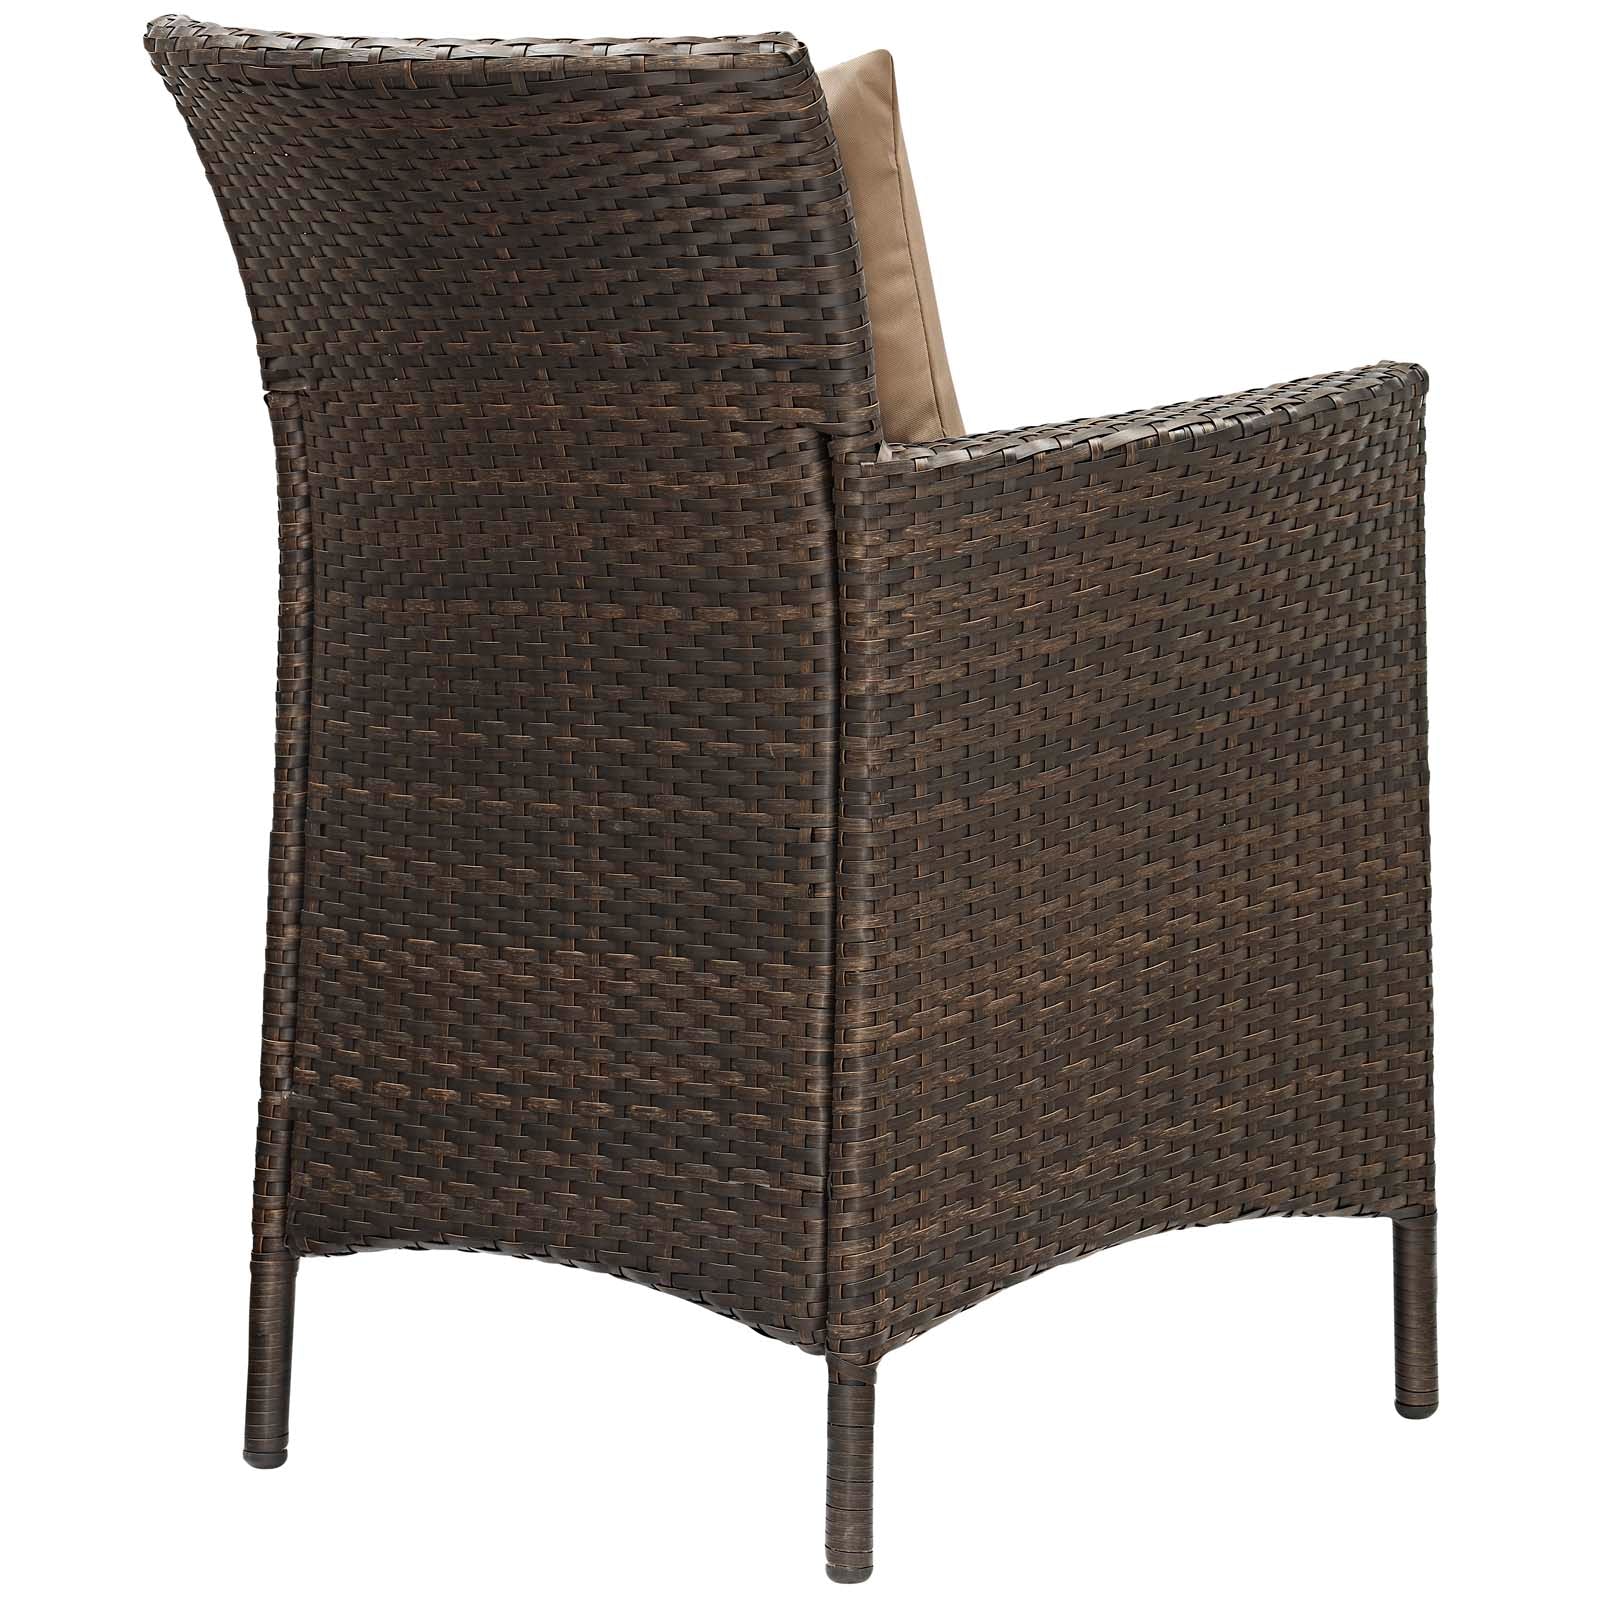 Modway Outdoor Dining Chairs - Conduit Outdoor Patio Wicker Rattan Dining Armchair Set of 4 Brown Mocha